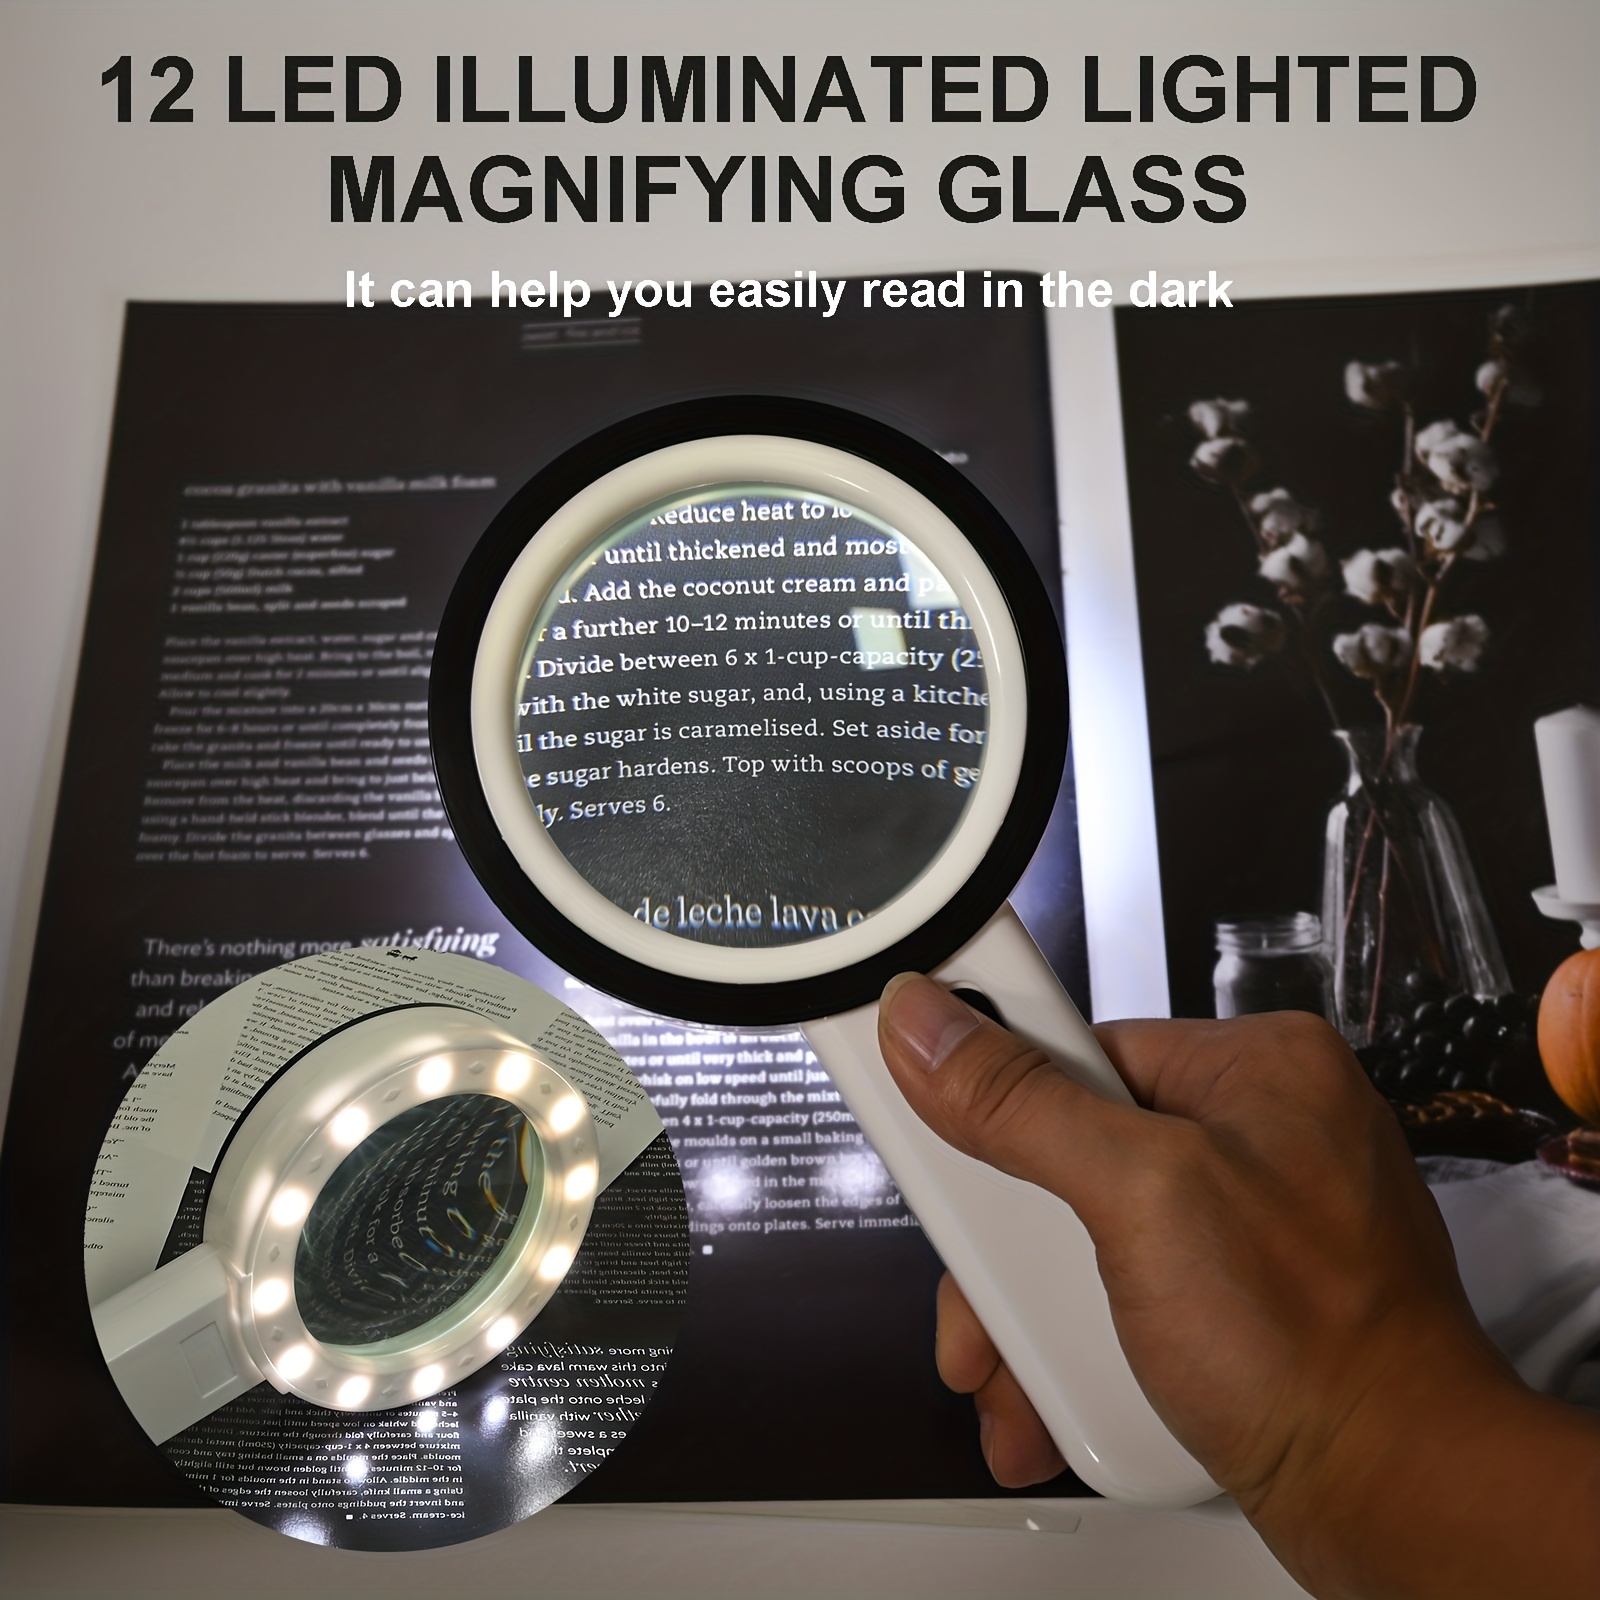 11X 5X Magnifying Glass with Light - Handheld Large Magnifying Glass 8 LED  Illuminated Lighted Magnifier for Macular Degeneration, Seniors Reading,  Soldering, Inspection, Coins, Jewelry, Exploring 